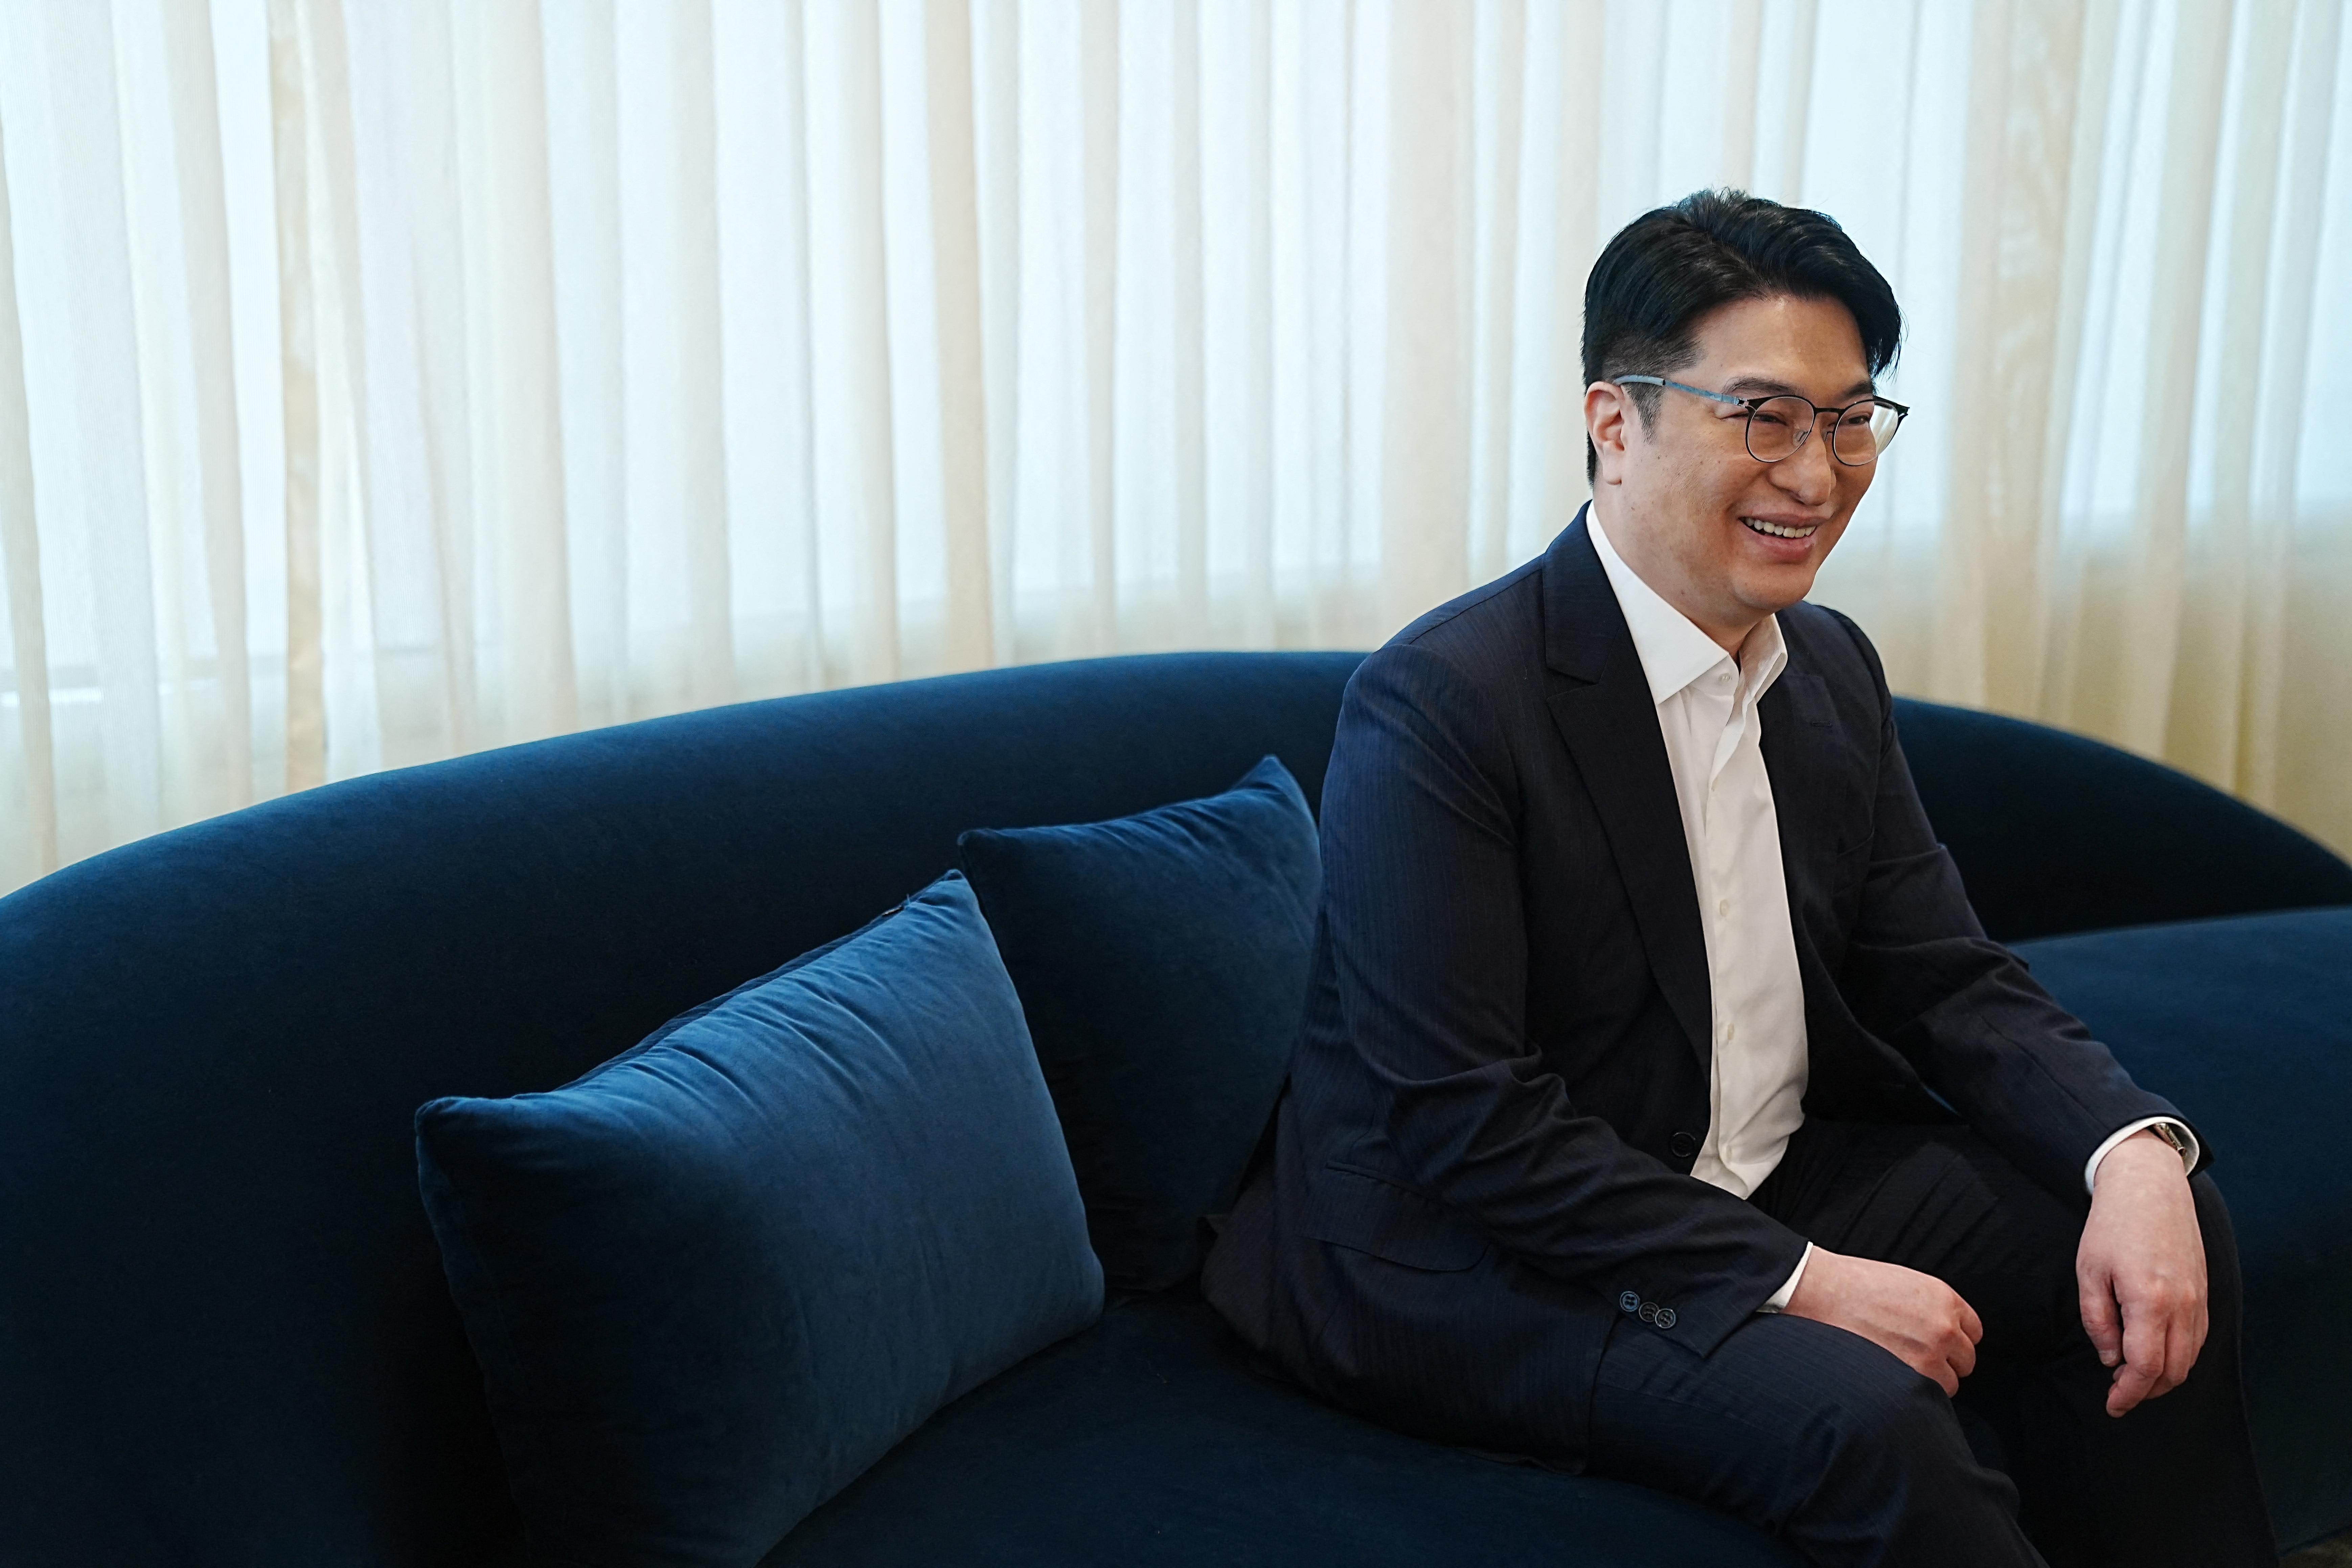 Martin Lee, co-chairman of Henderson Land Development, speaks at his office in Hong Kong